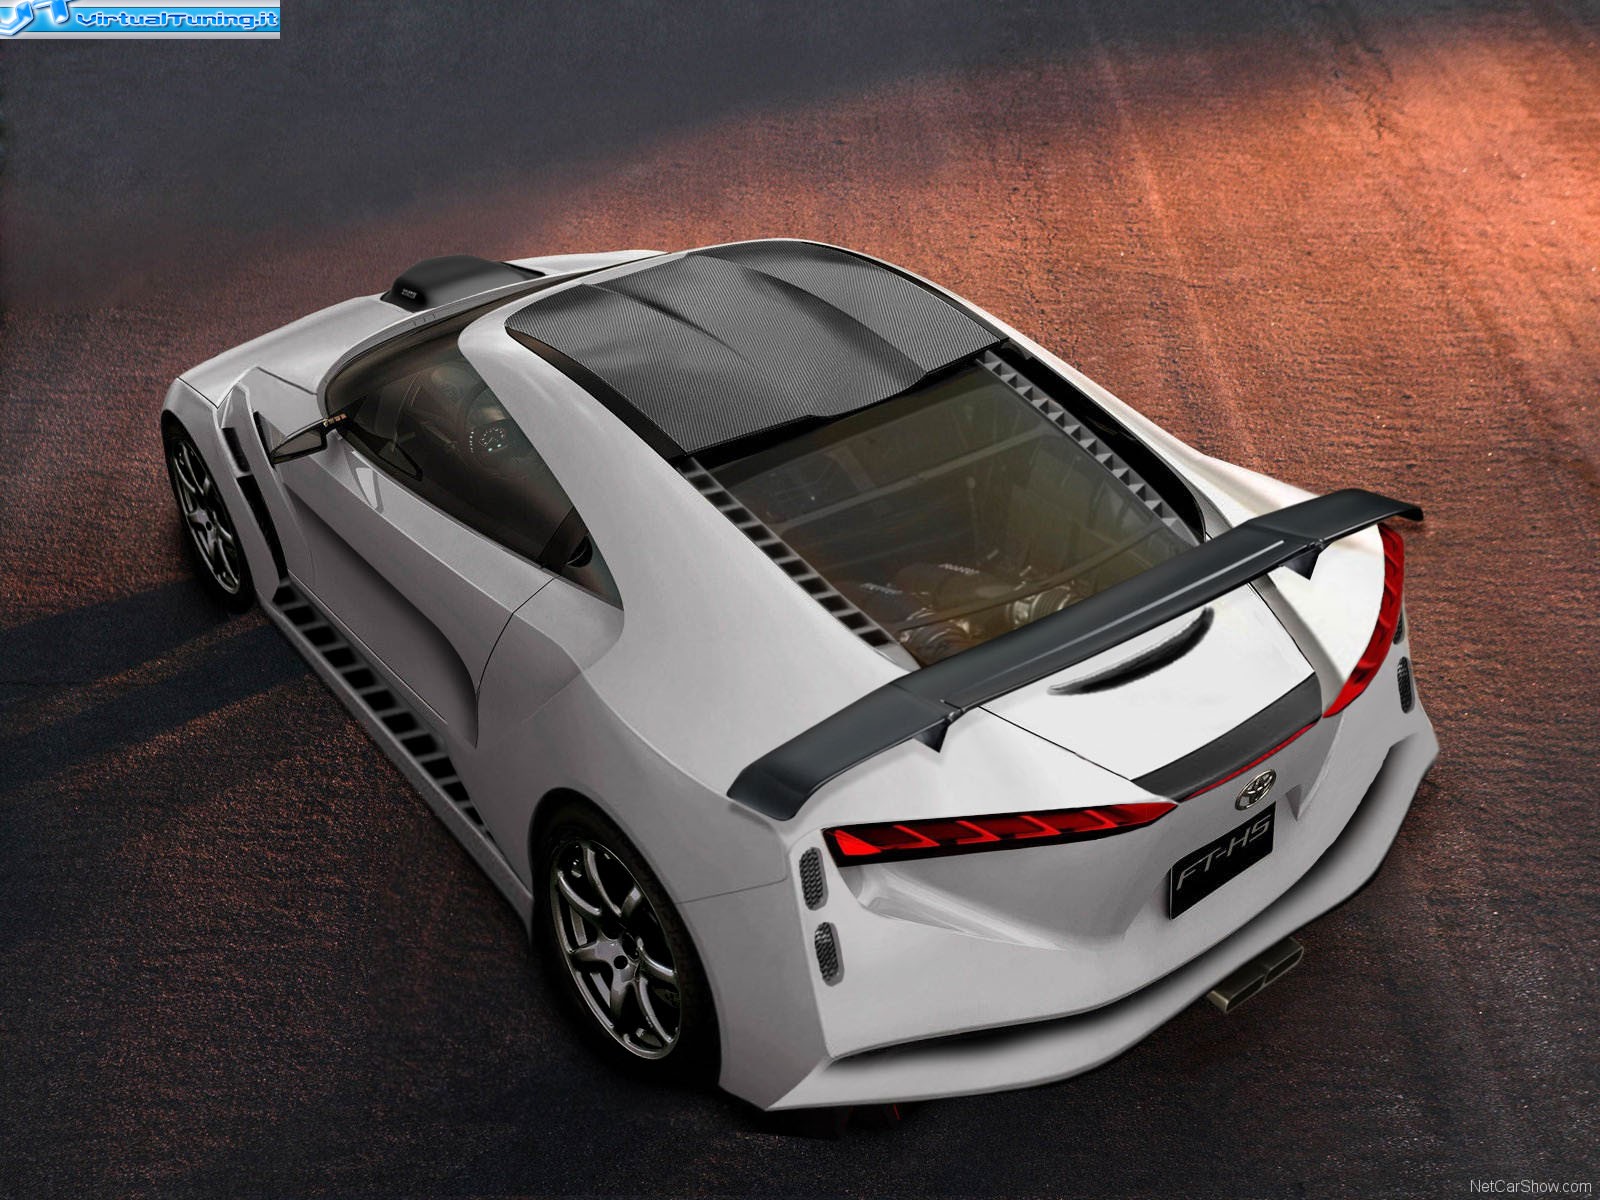 VirtualTuning TOYOTA FT-HS concept by 